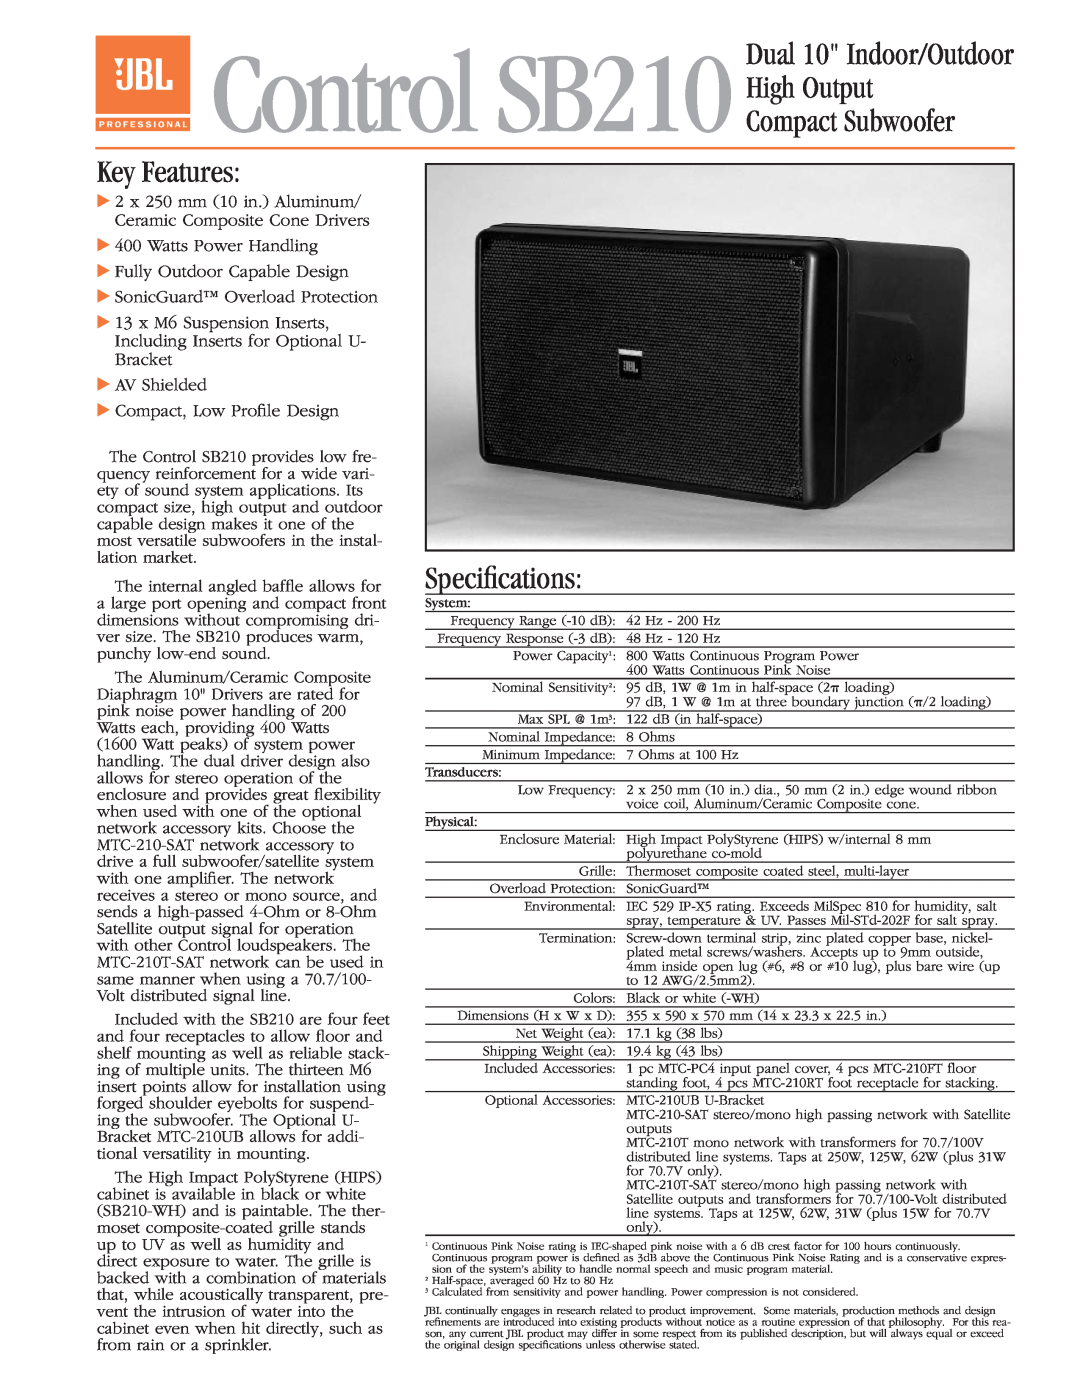 JBL specifications Dual 10 Indoor/Outdoor, Compact Subwoofer Key Features, Speciﬁcations, Control SB210 High Output 